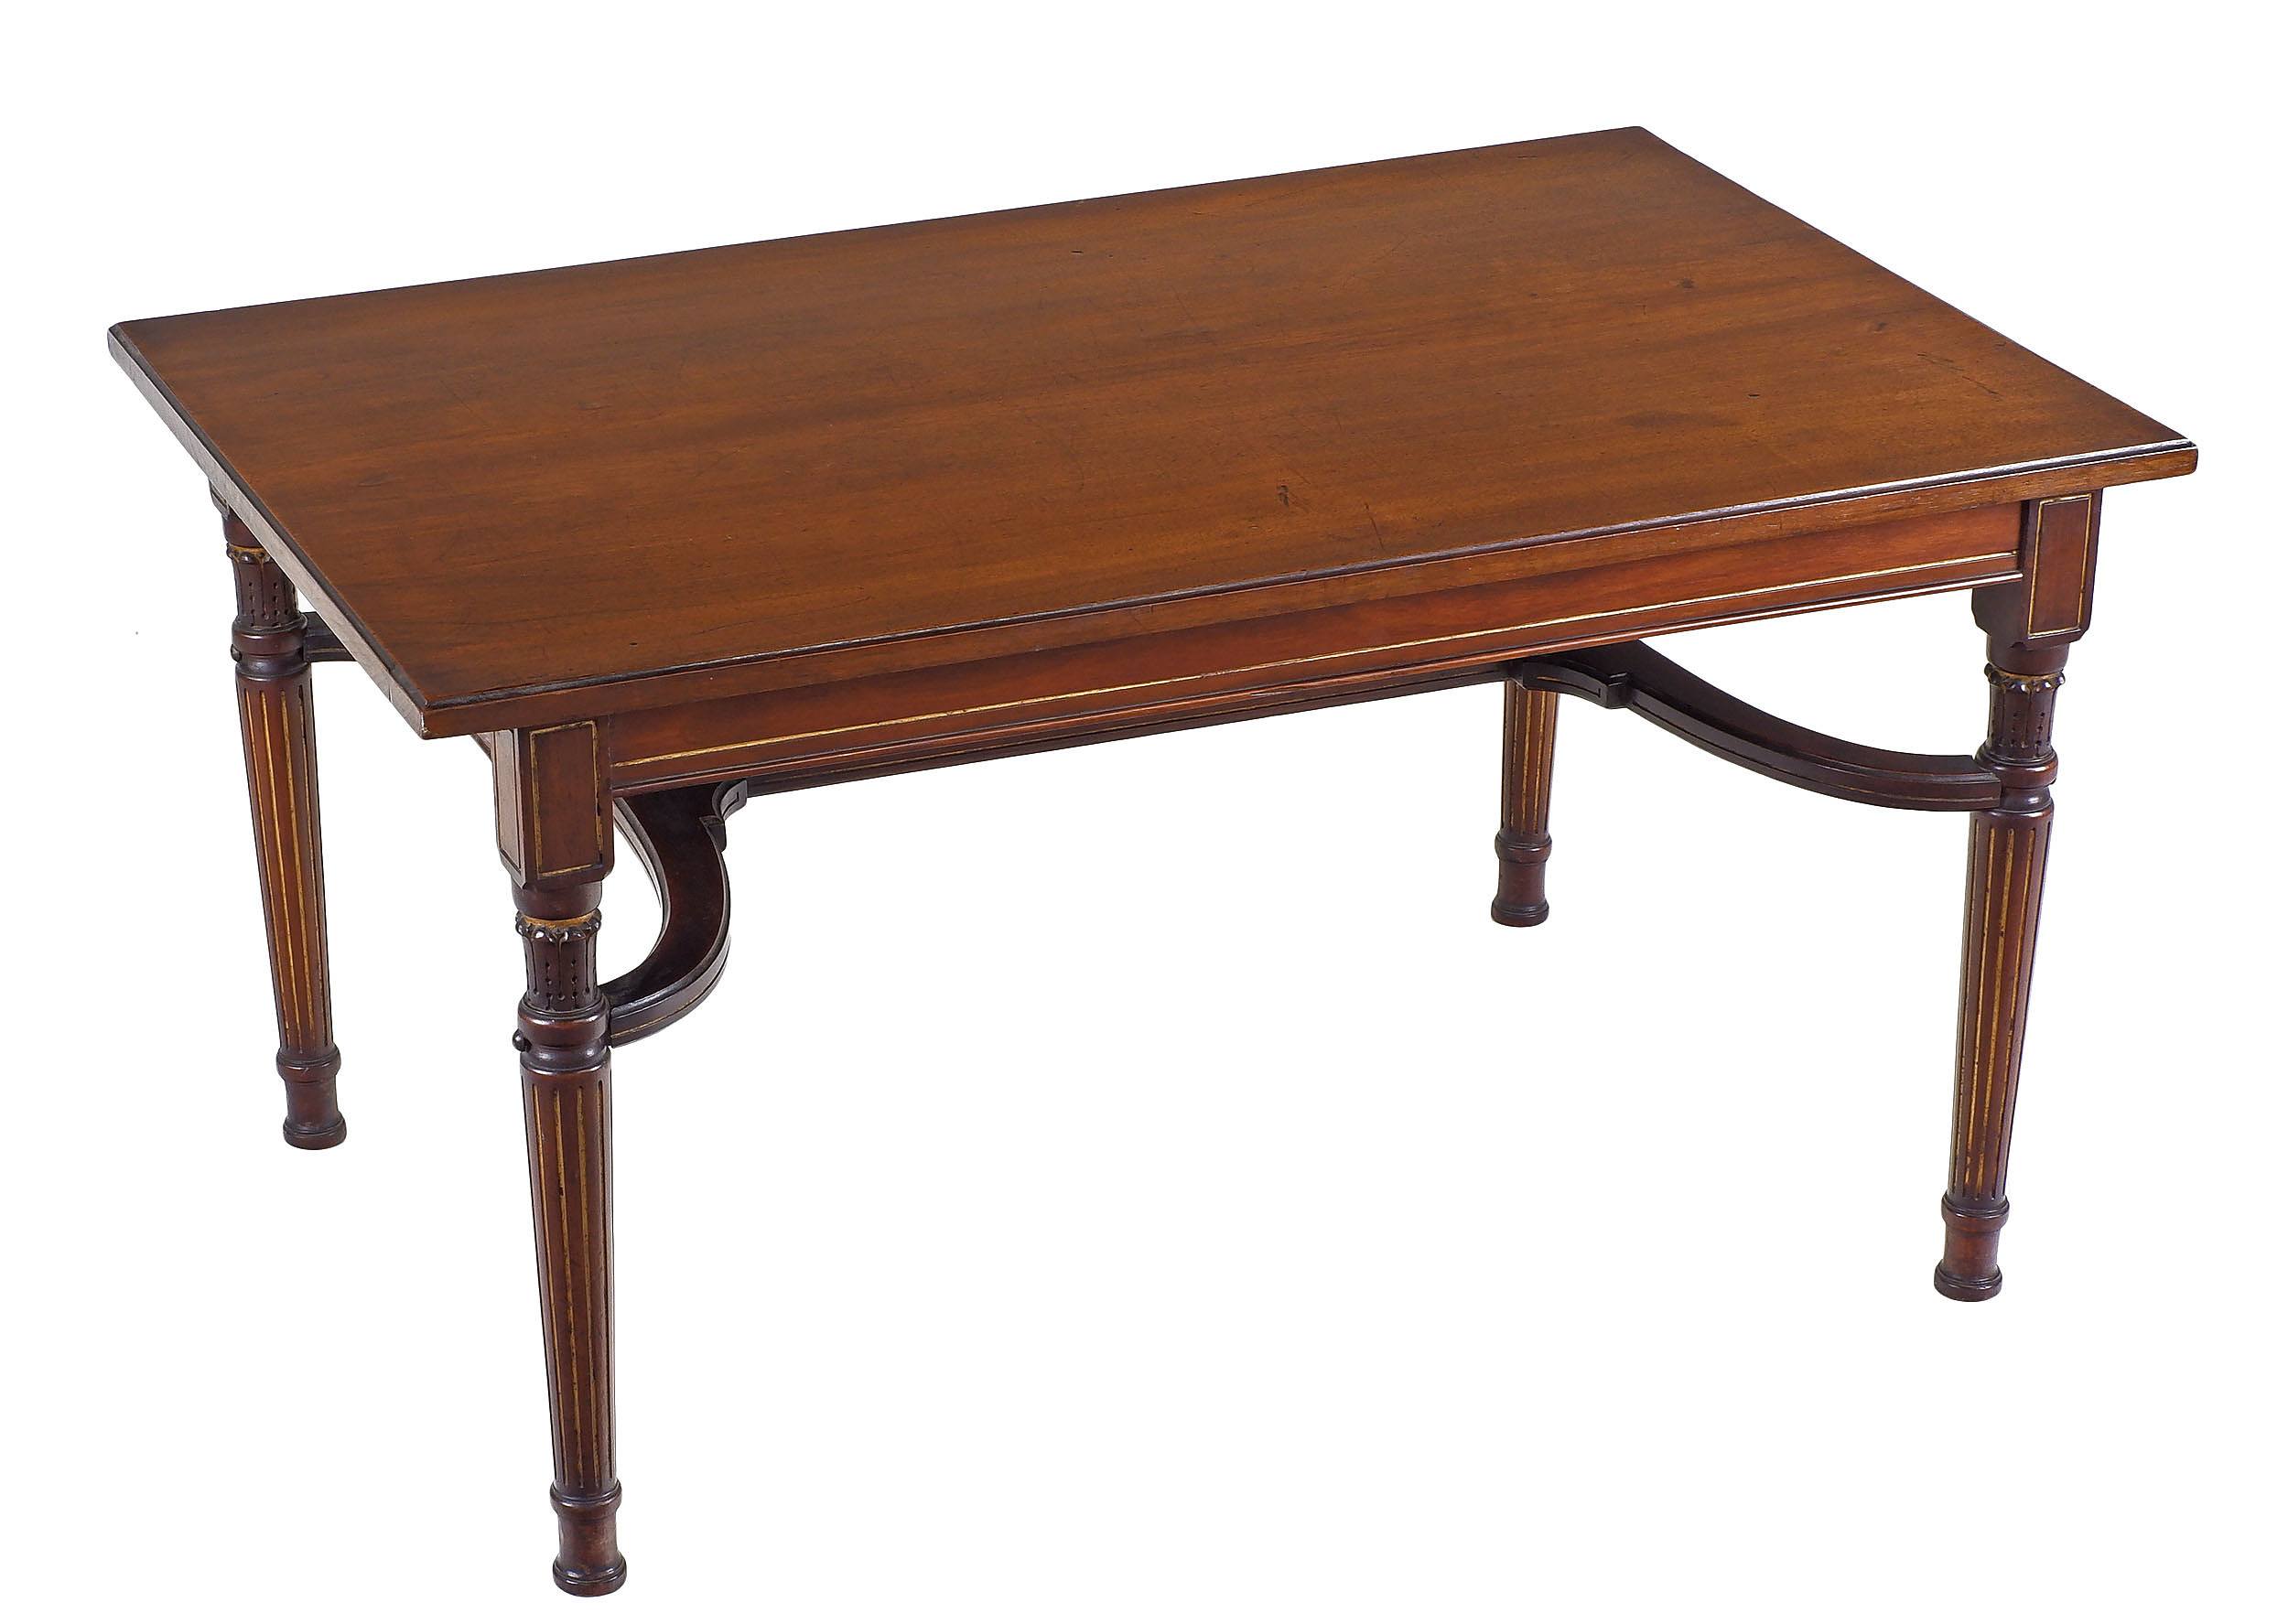 'Reproduction Regency Style Walnut Coffee Table with Gilt Highlights 3rd Quarter 20th Century'